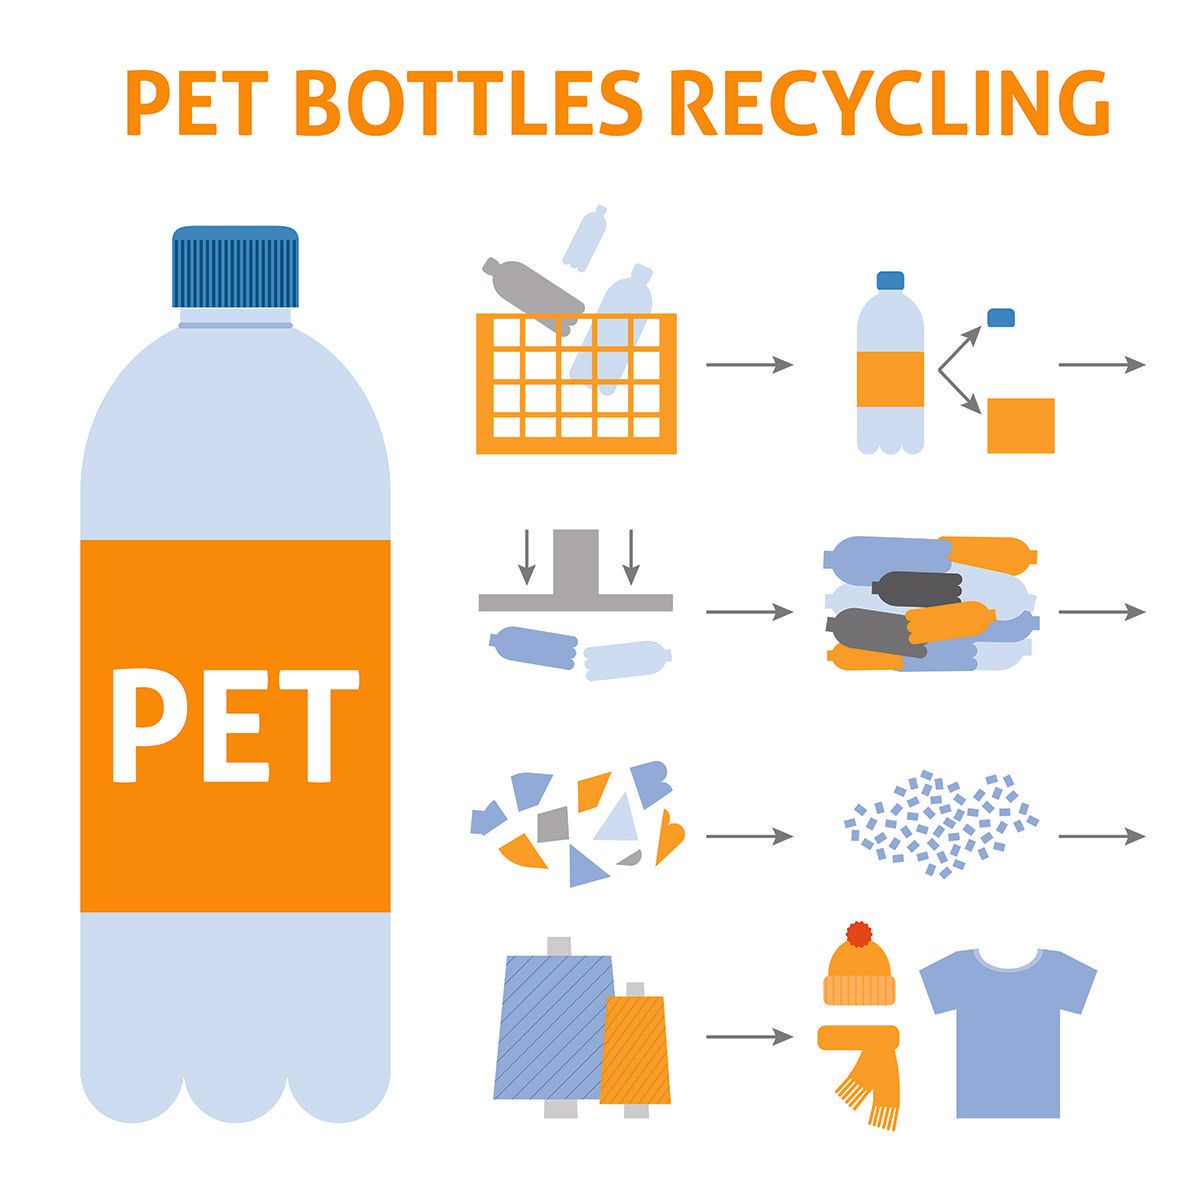 PET plastic bottles recycling graphic.